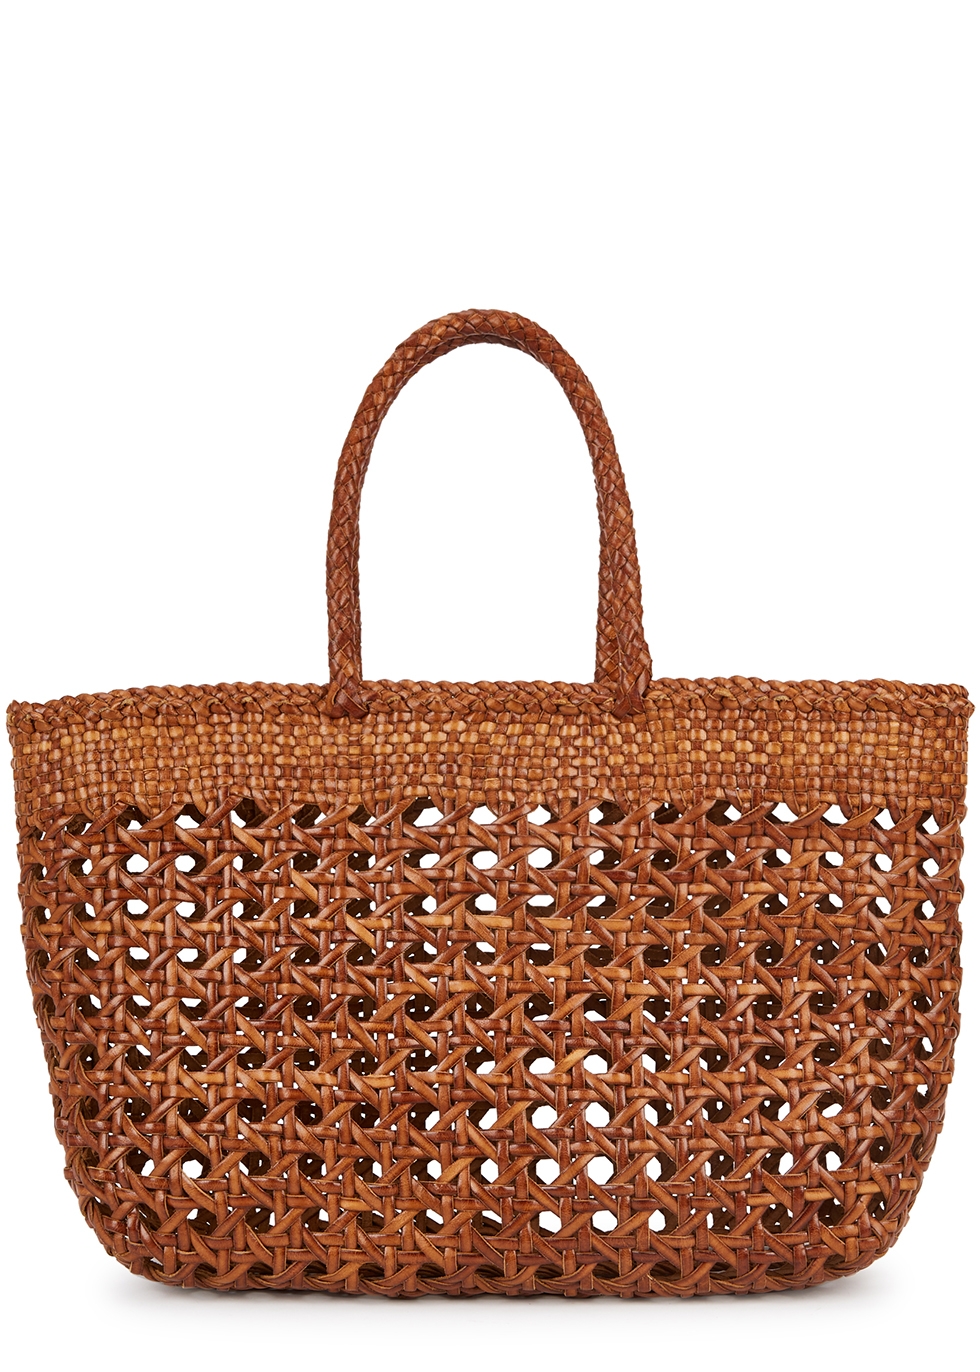 Dragon Diffusion Cannage Kanpur brown woven leather basket bag